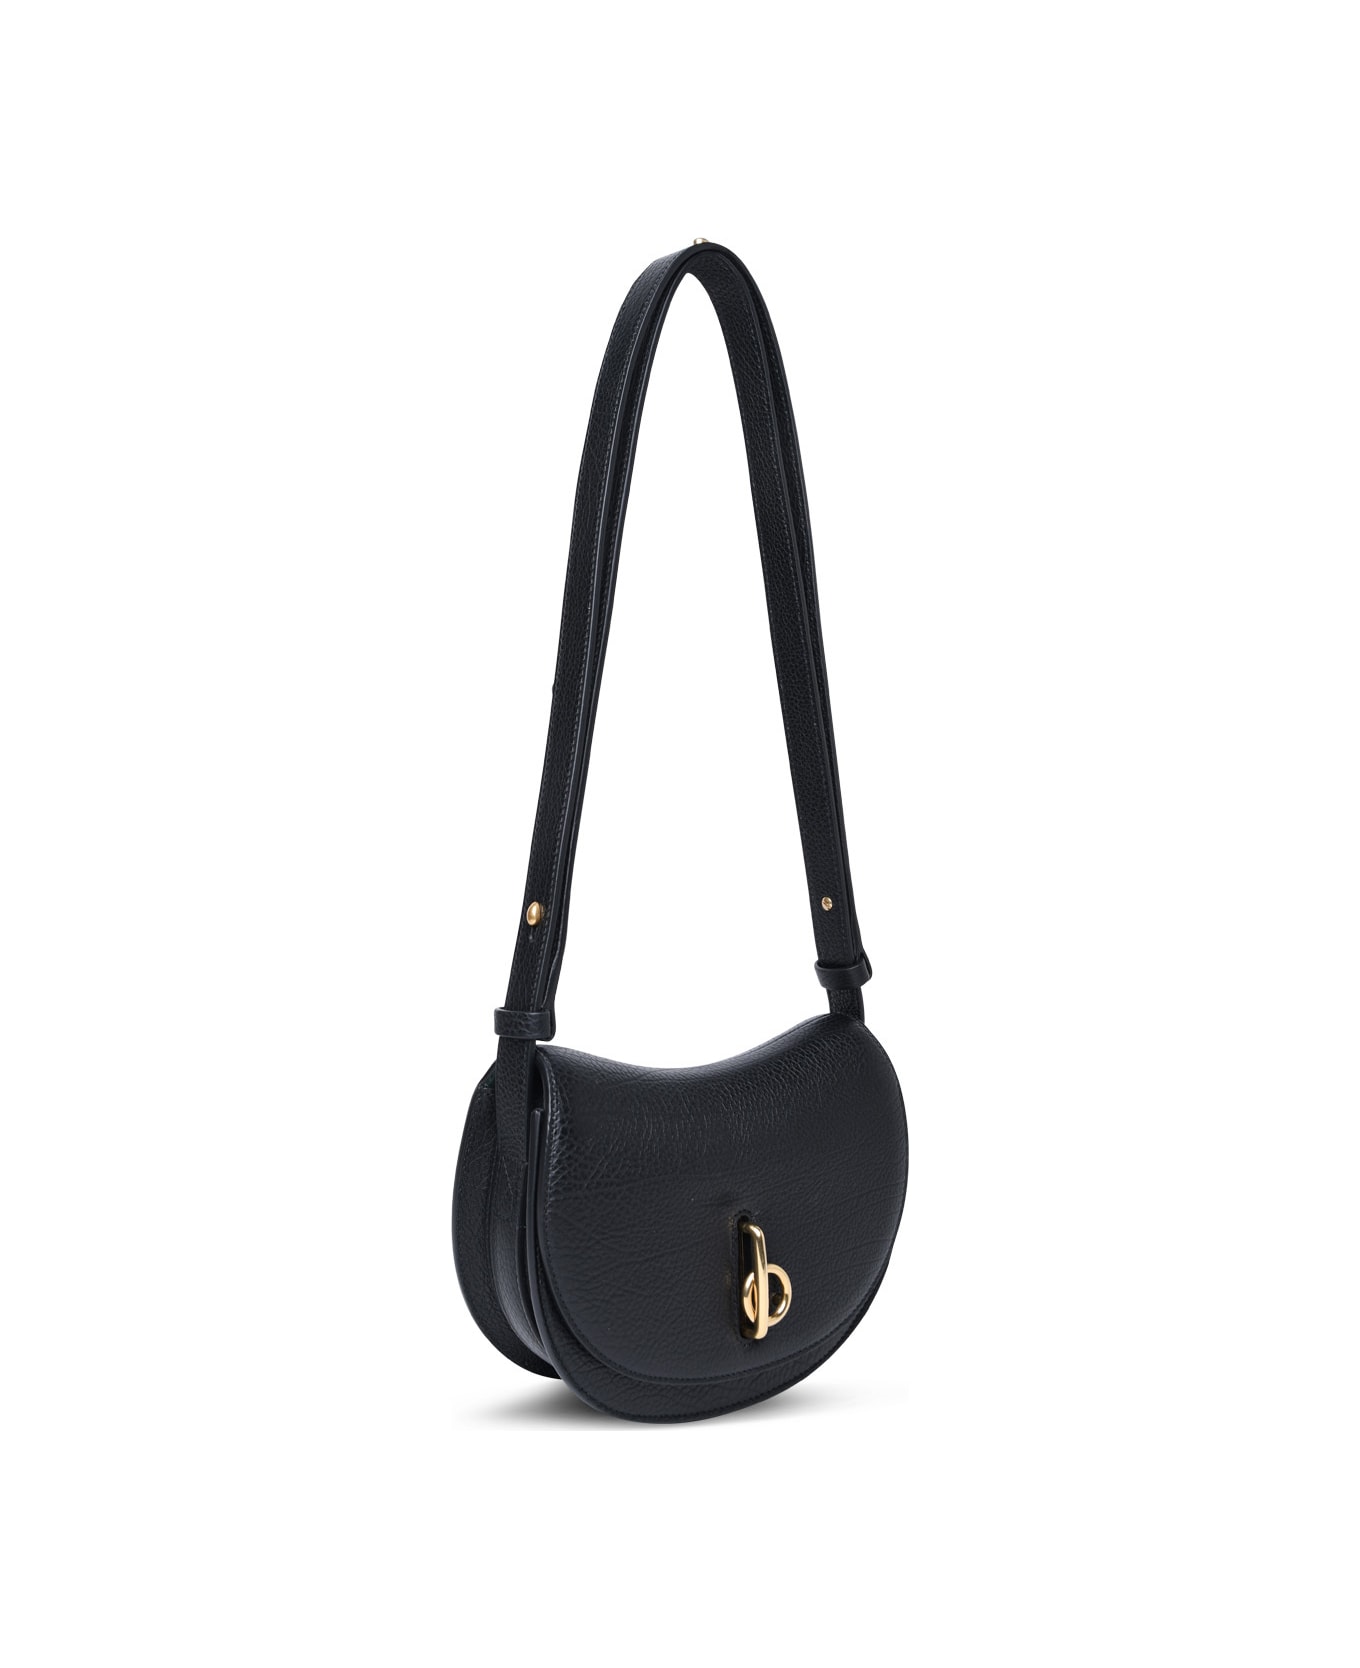 Burberry 'rocking Horse' Mini Bag In Black Leather - Black トートバッグ